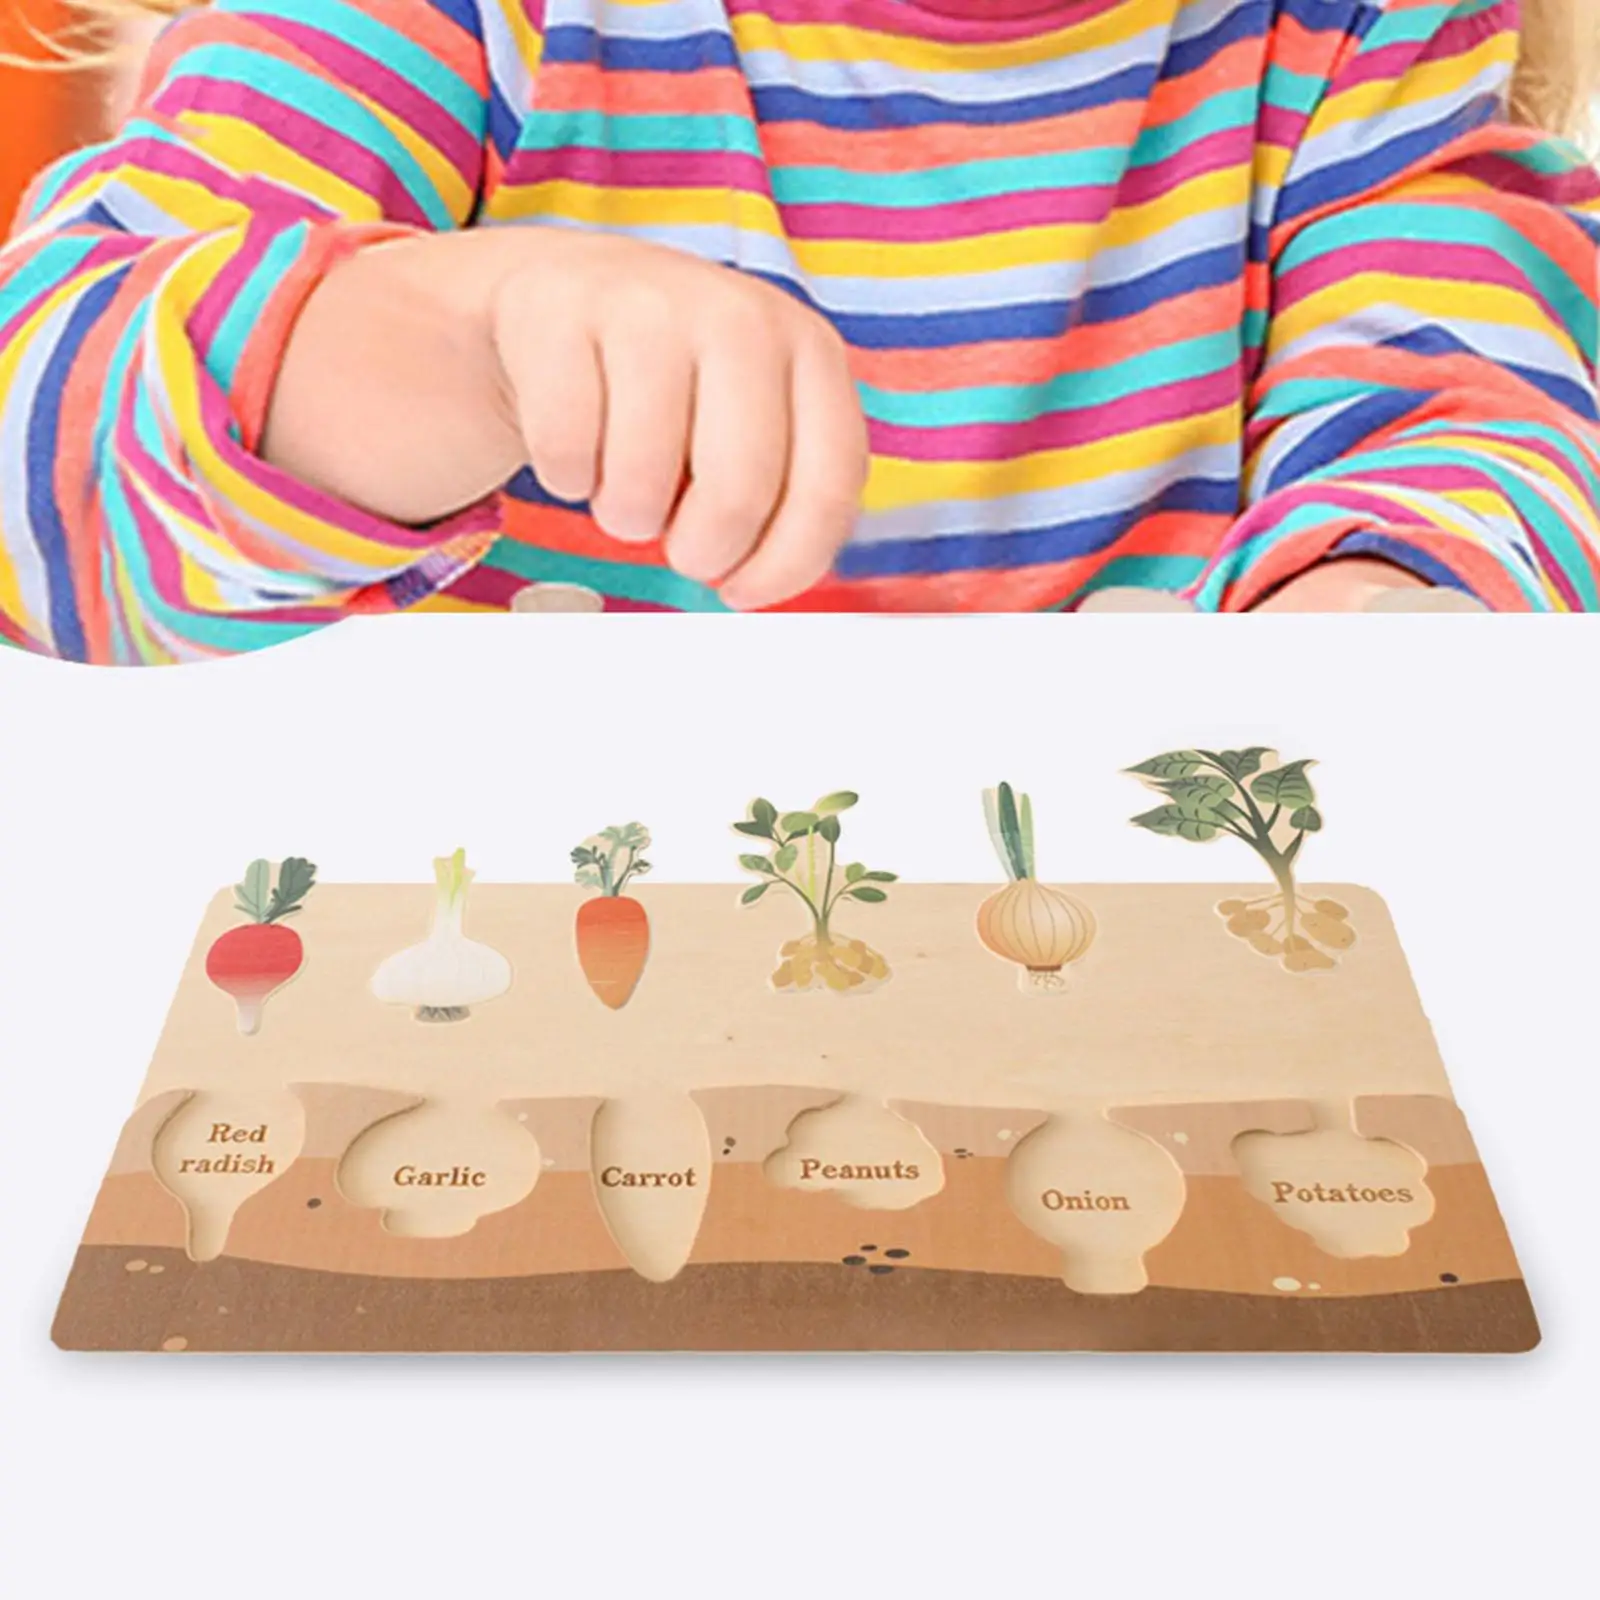 

Toddlers Wooden Puzzle Developmental Educational Teaching Aids Grow Vegetables Game Toy for Activities Preschool Outdoor Trips